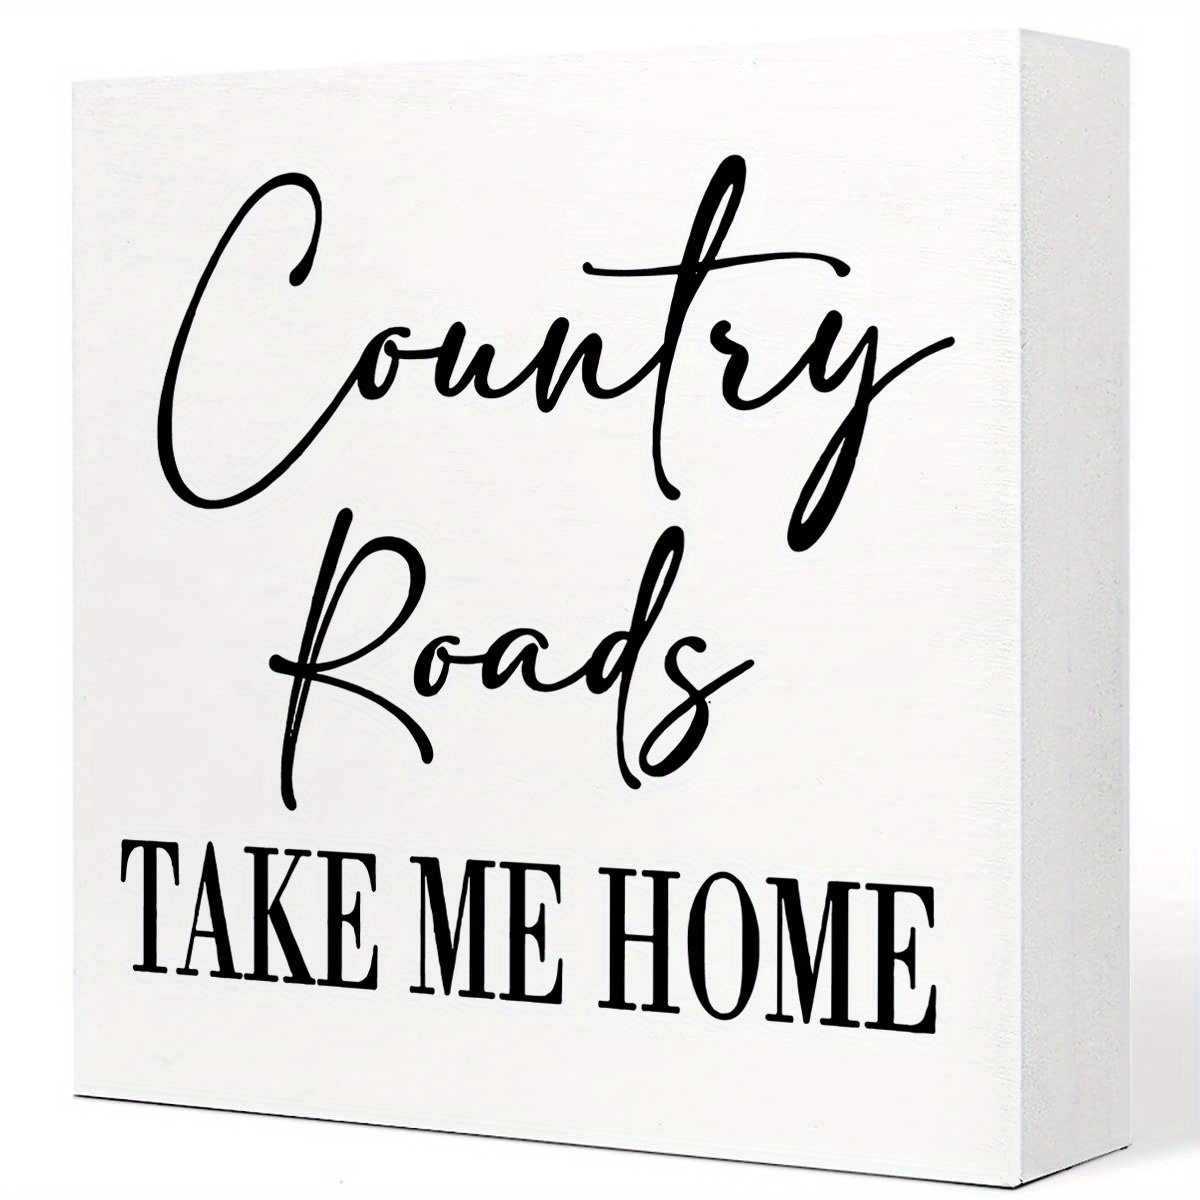 

1pc Country Home Farmhouse Sign, Desk Decor Wooden Box Sign Housewarming Gift Rustic Wood Block Plaque Box Sign For Living Room Kitchen Bathroom Shelf Table Decoration Country Roads Take Me Home Sign